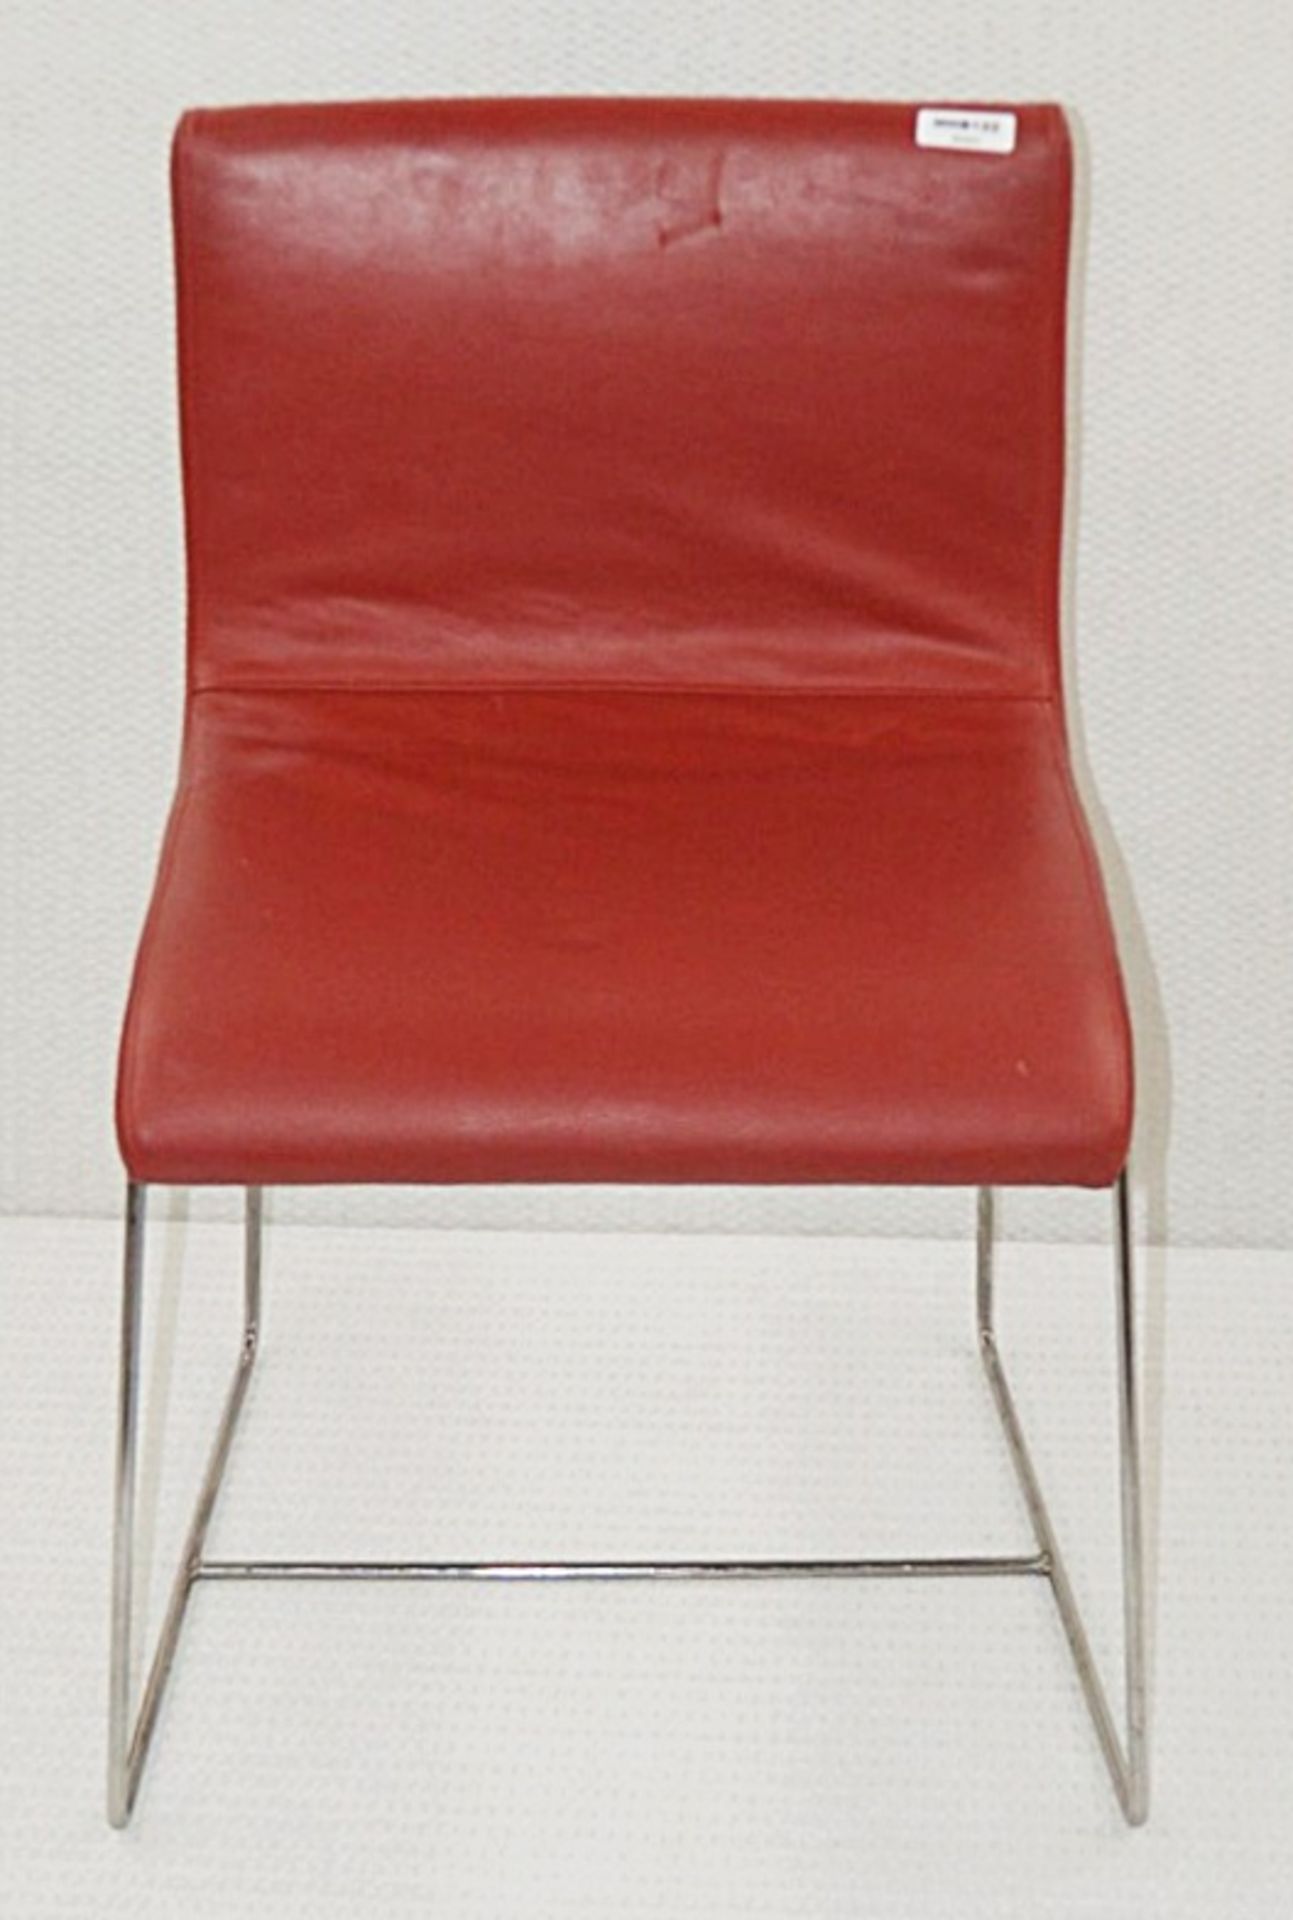 4 x Stylish Contemporary Chairs Upholstered In Red Faux Leather With Chrome Bases - Dimensions: - Image 6 of 6